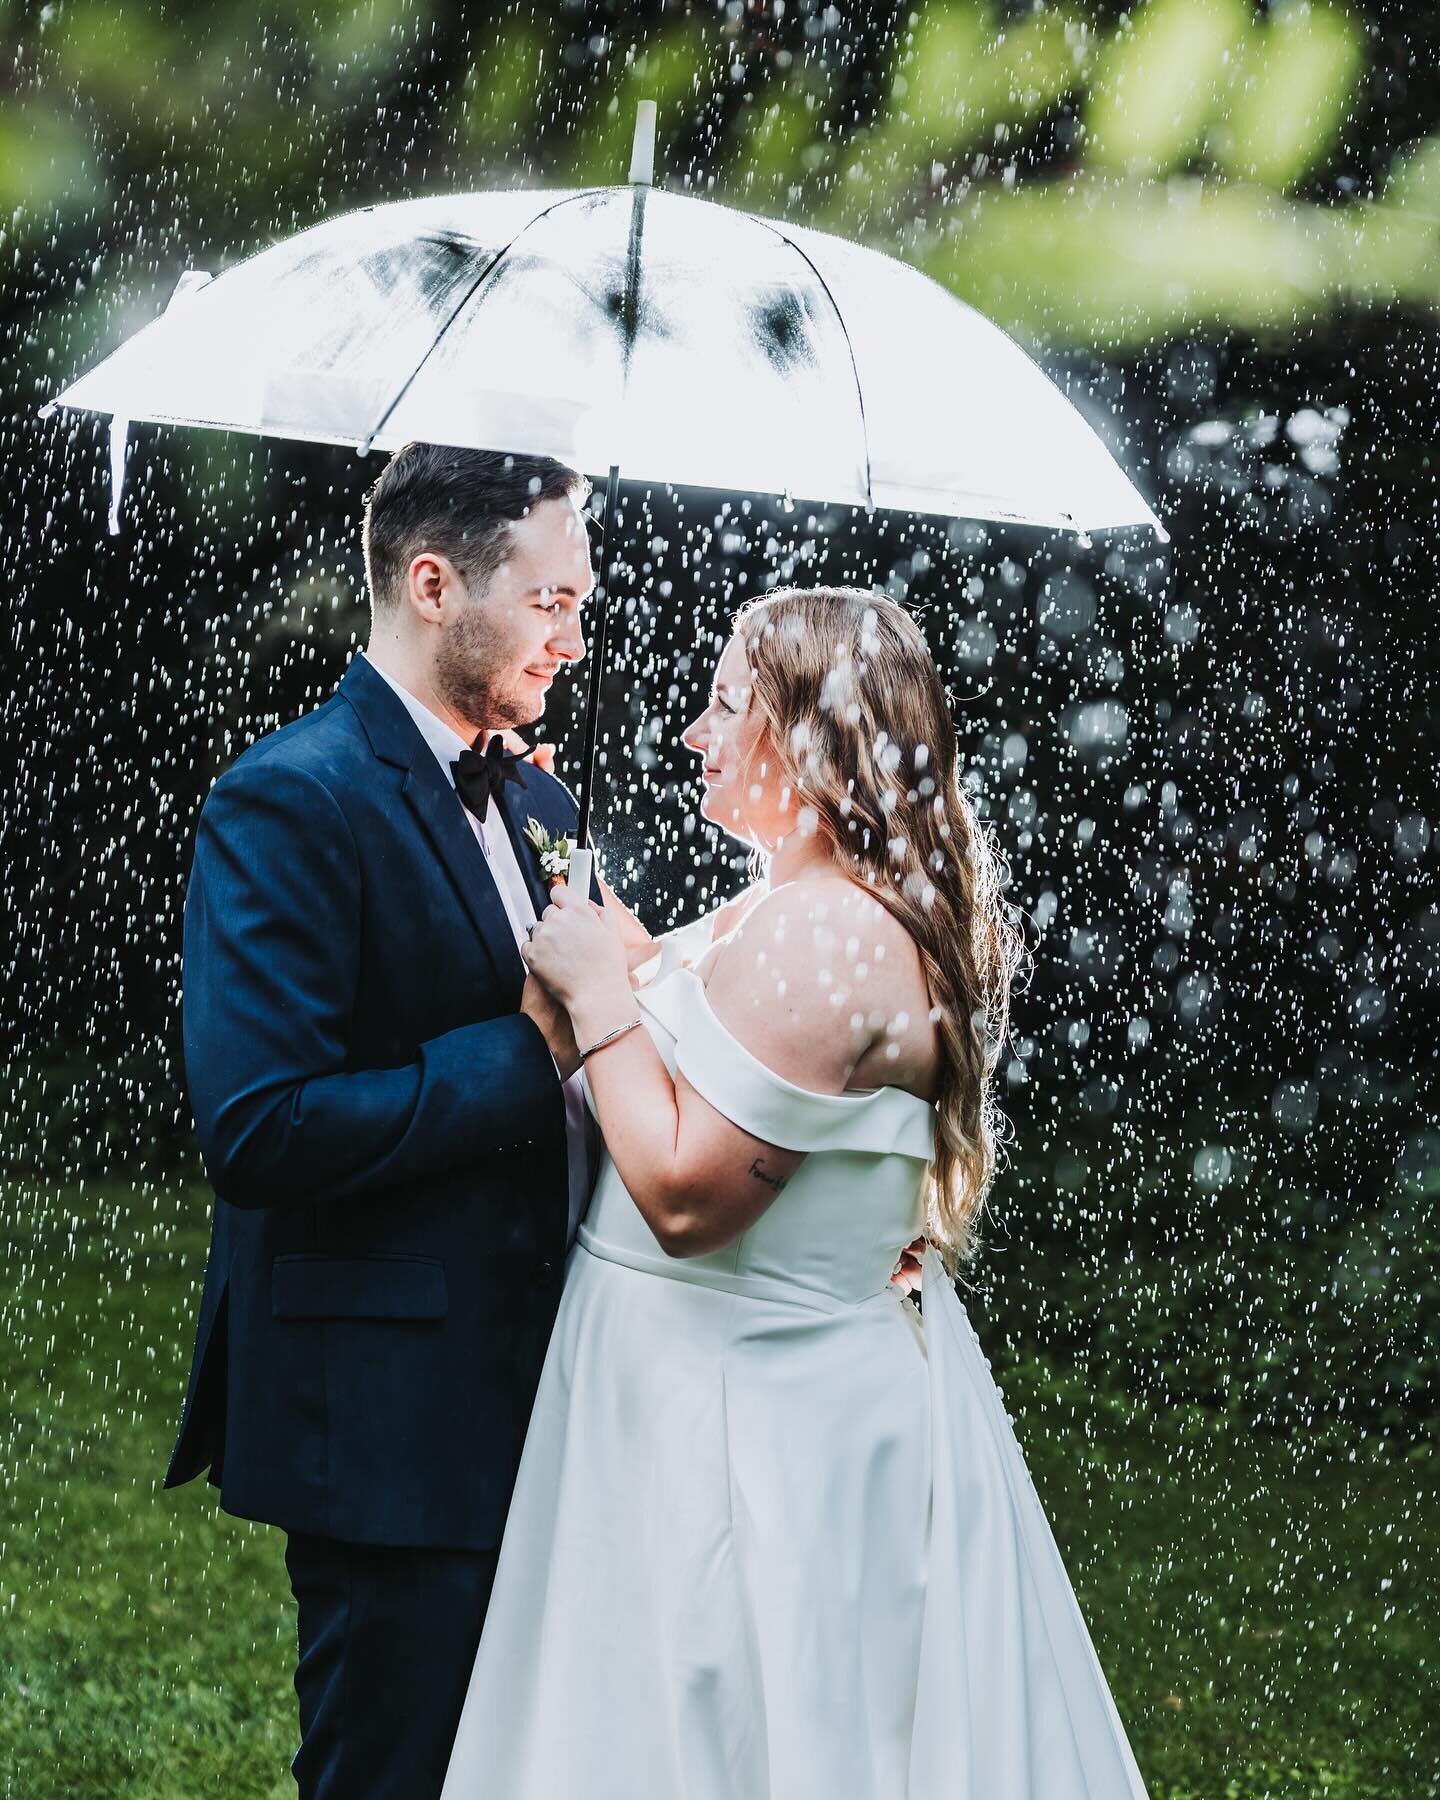 Jessica + Reece ☔️💍🍃
Living proof that cloudy, rainy wedding days can really be some of the best, most fun wedding days. 

Congrats on your roaring success of a wedding this weekend guys!